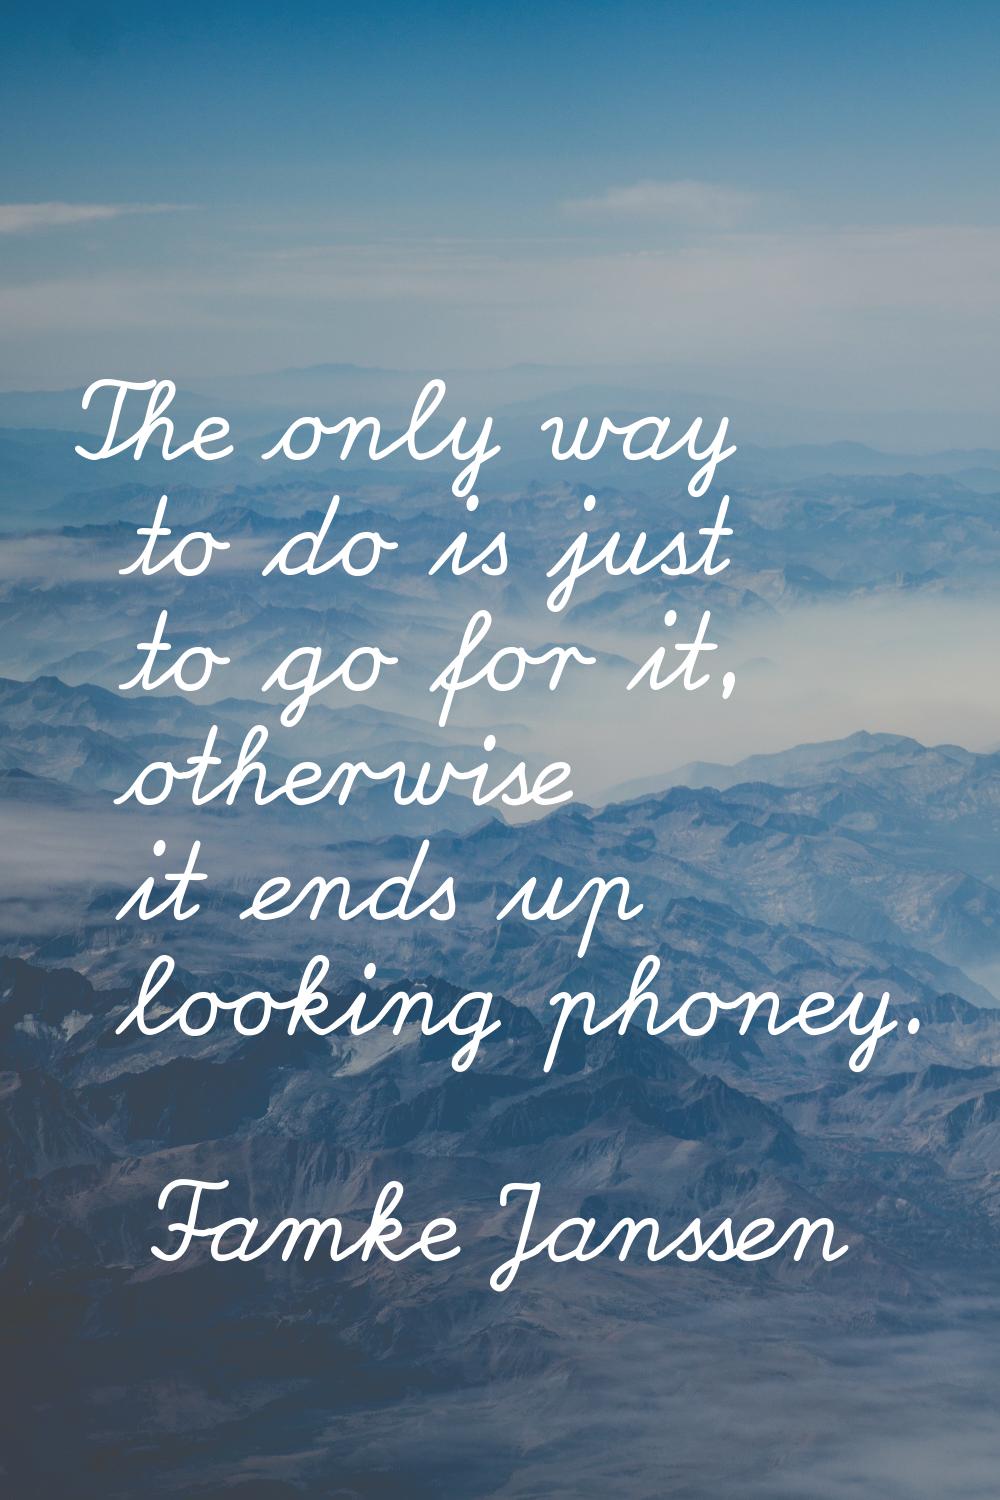 The only way to do is just to go for it, otherwise it ends up looking phoney.